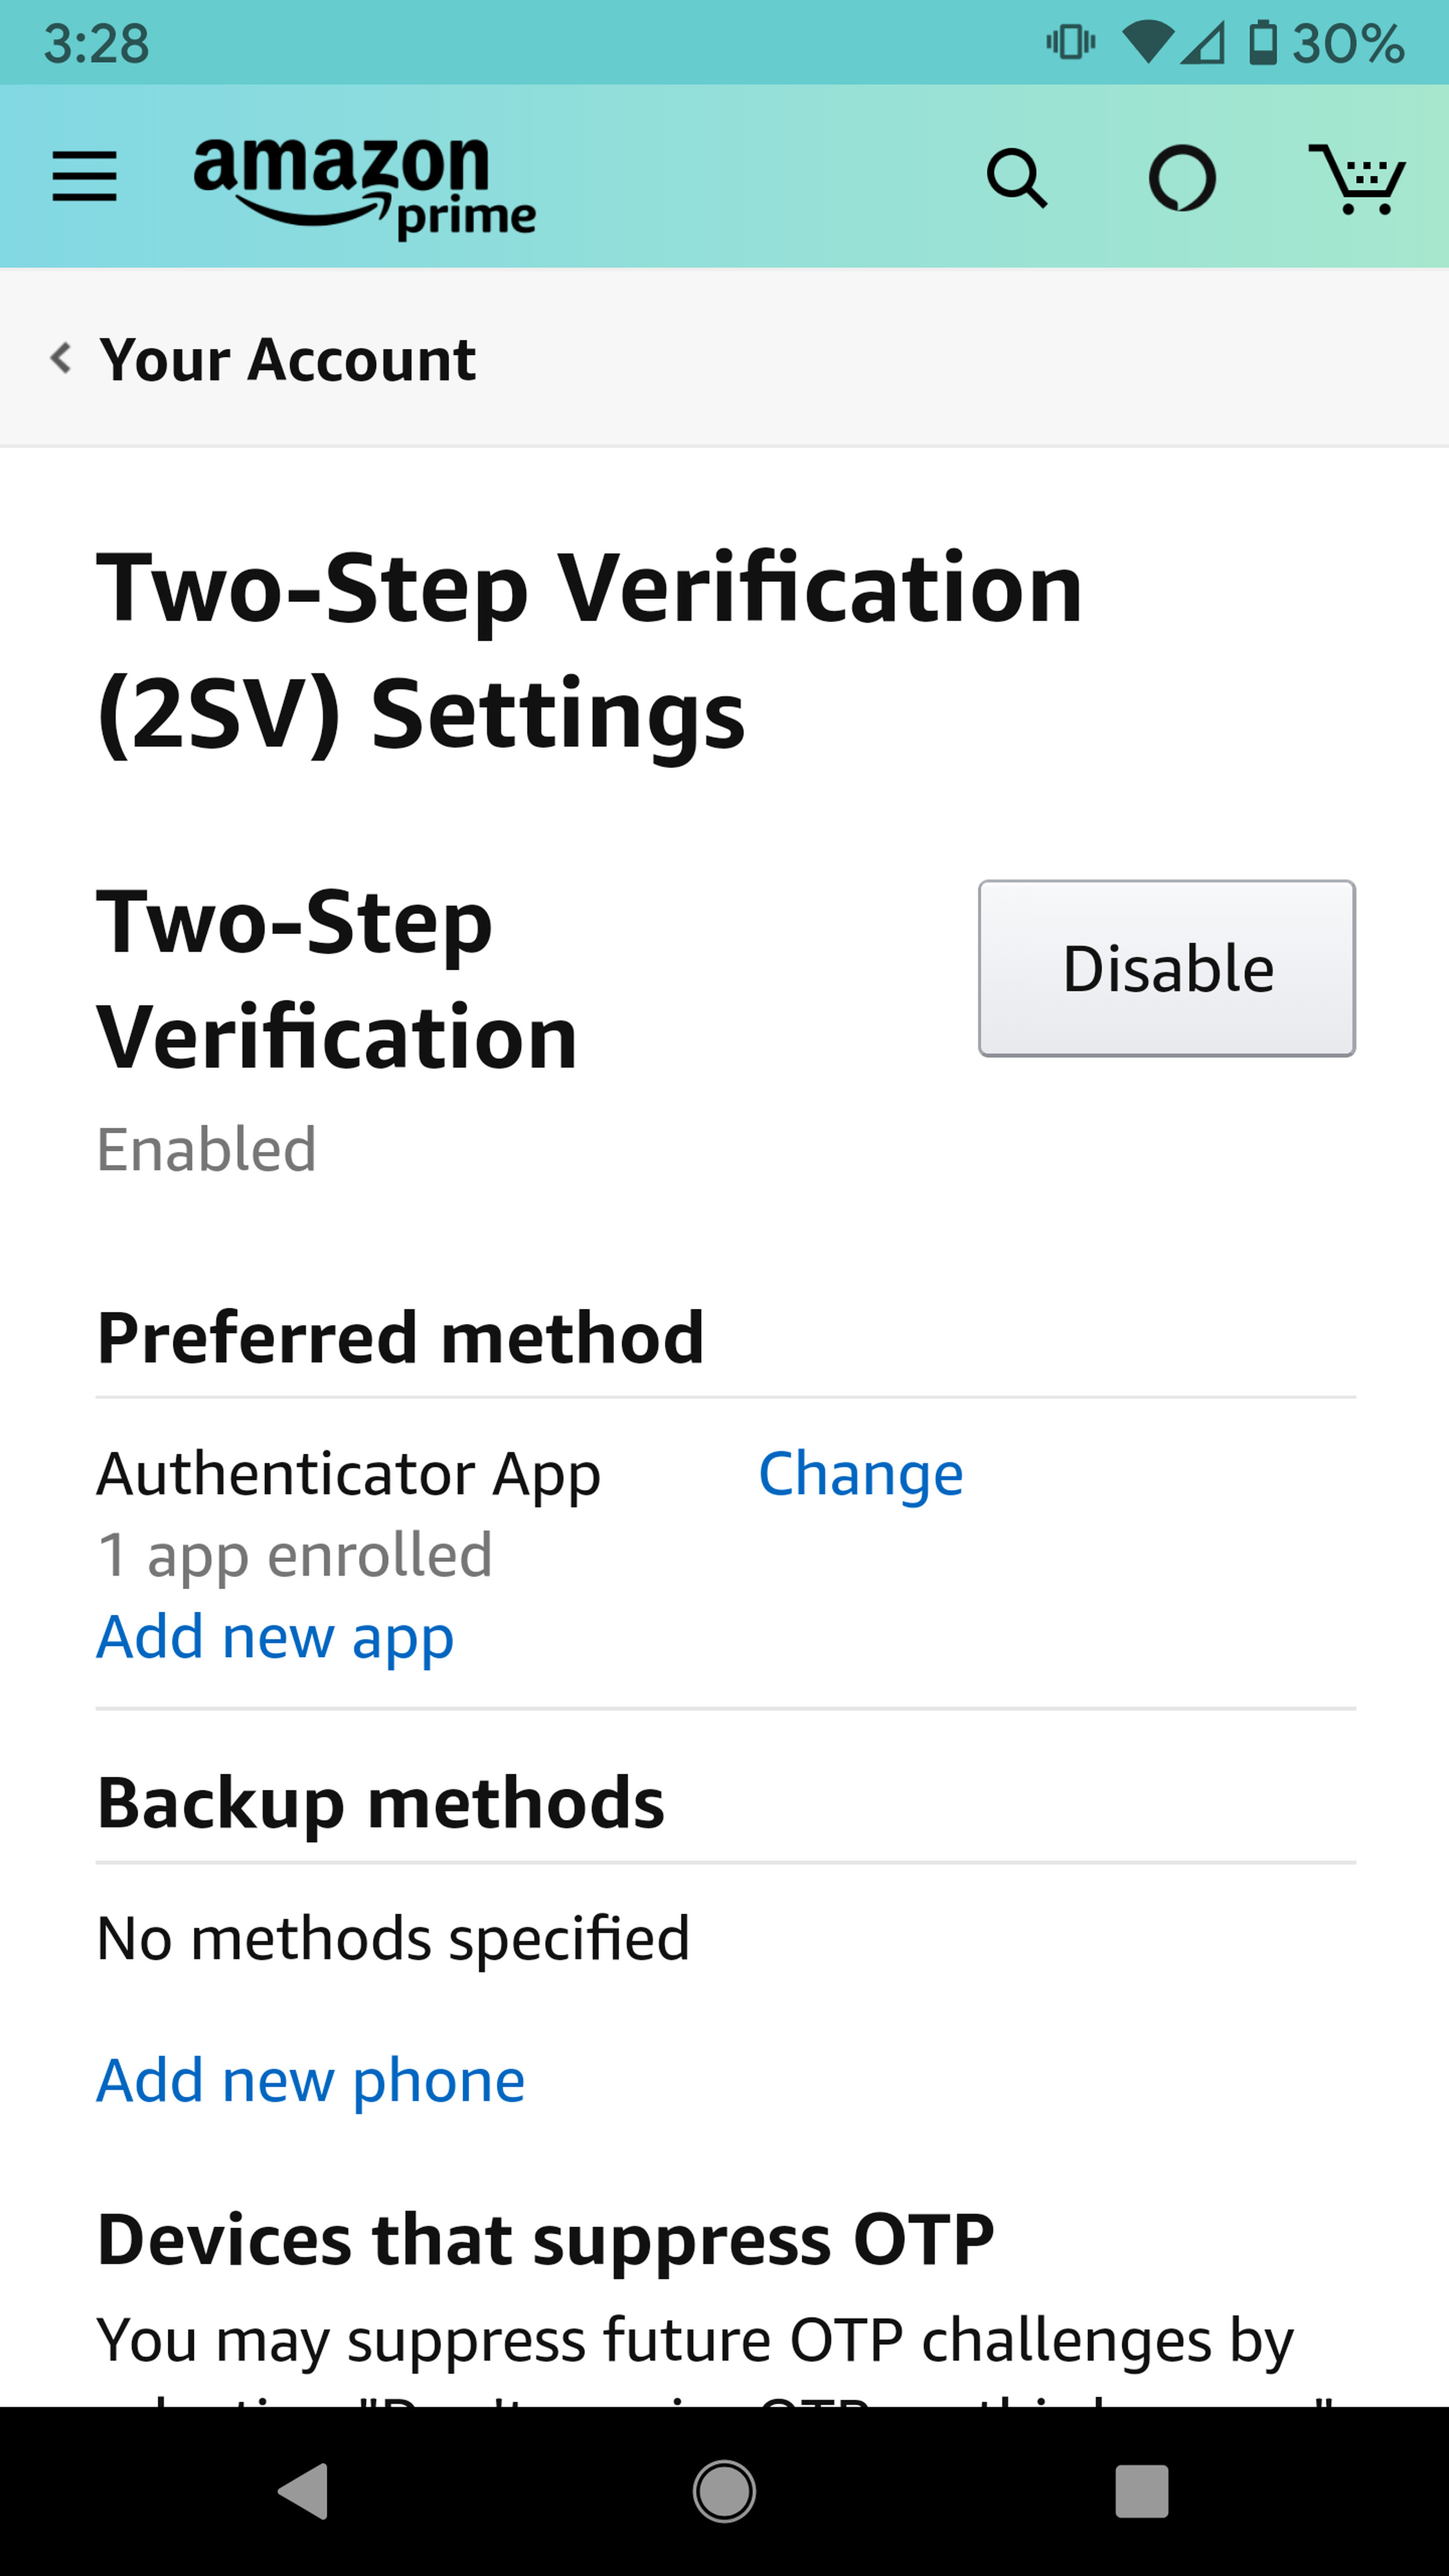 You can use a third-party authenticator app.